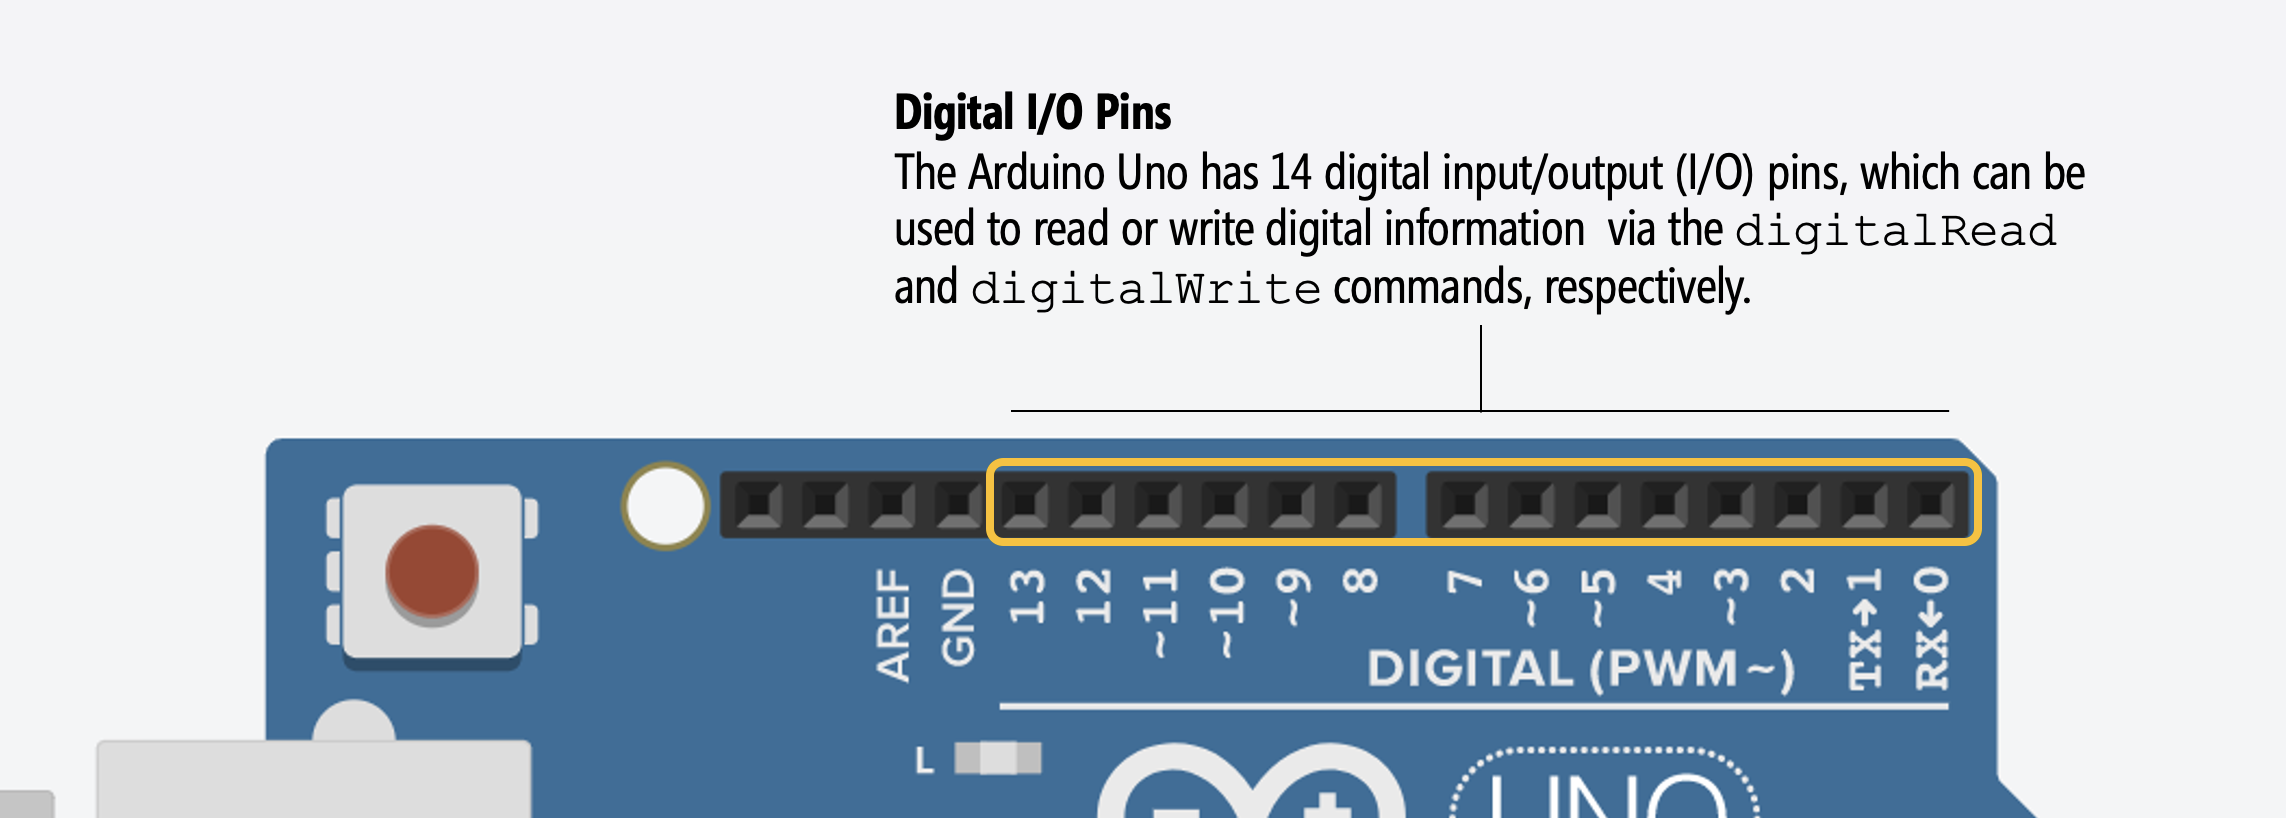 Close-up image of the 14 digital I/O pins on the Arduino Uno